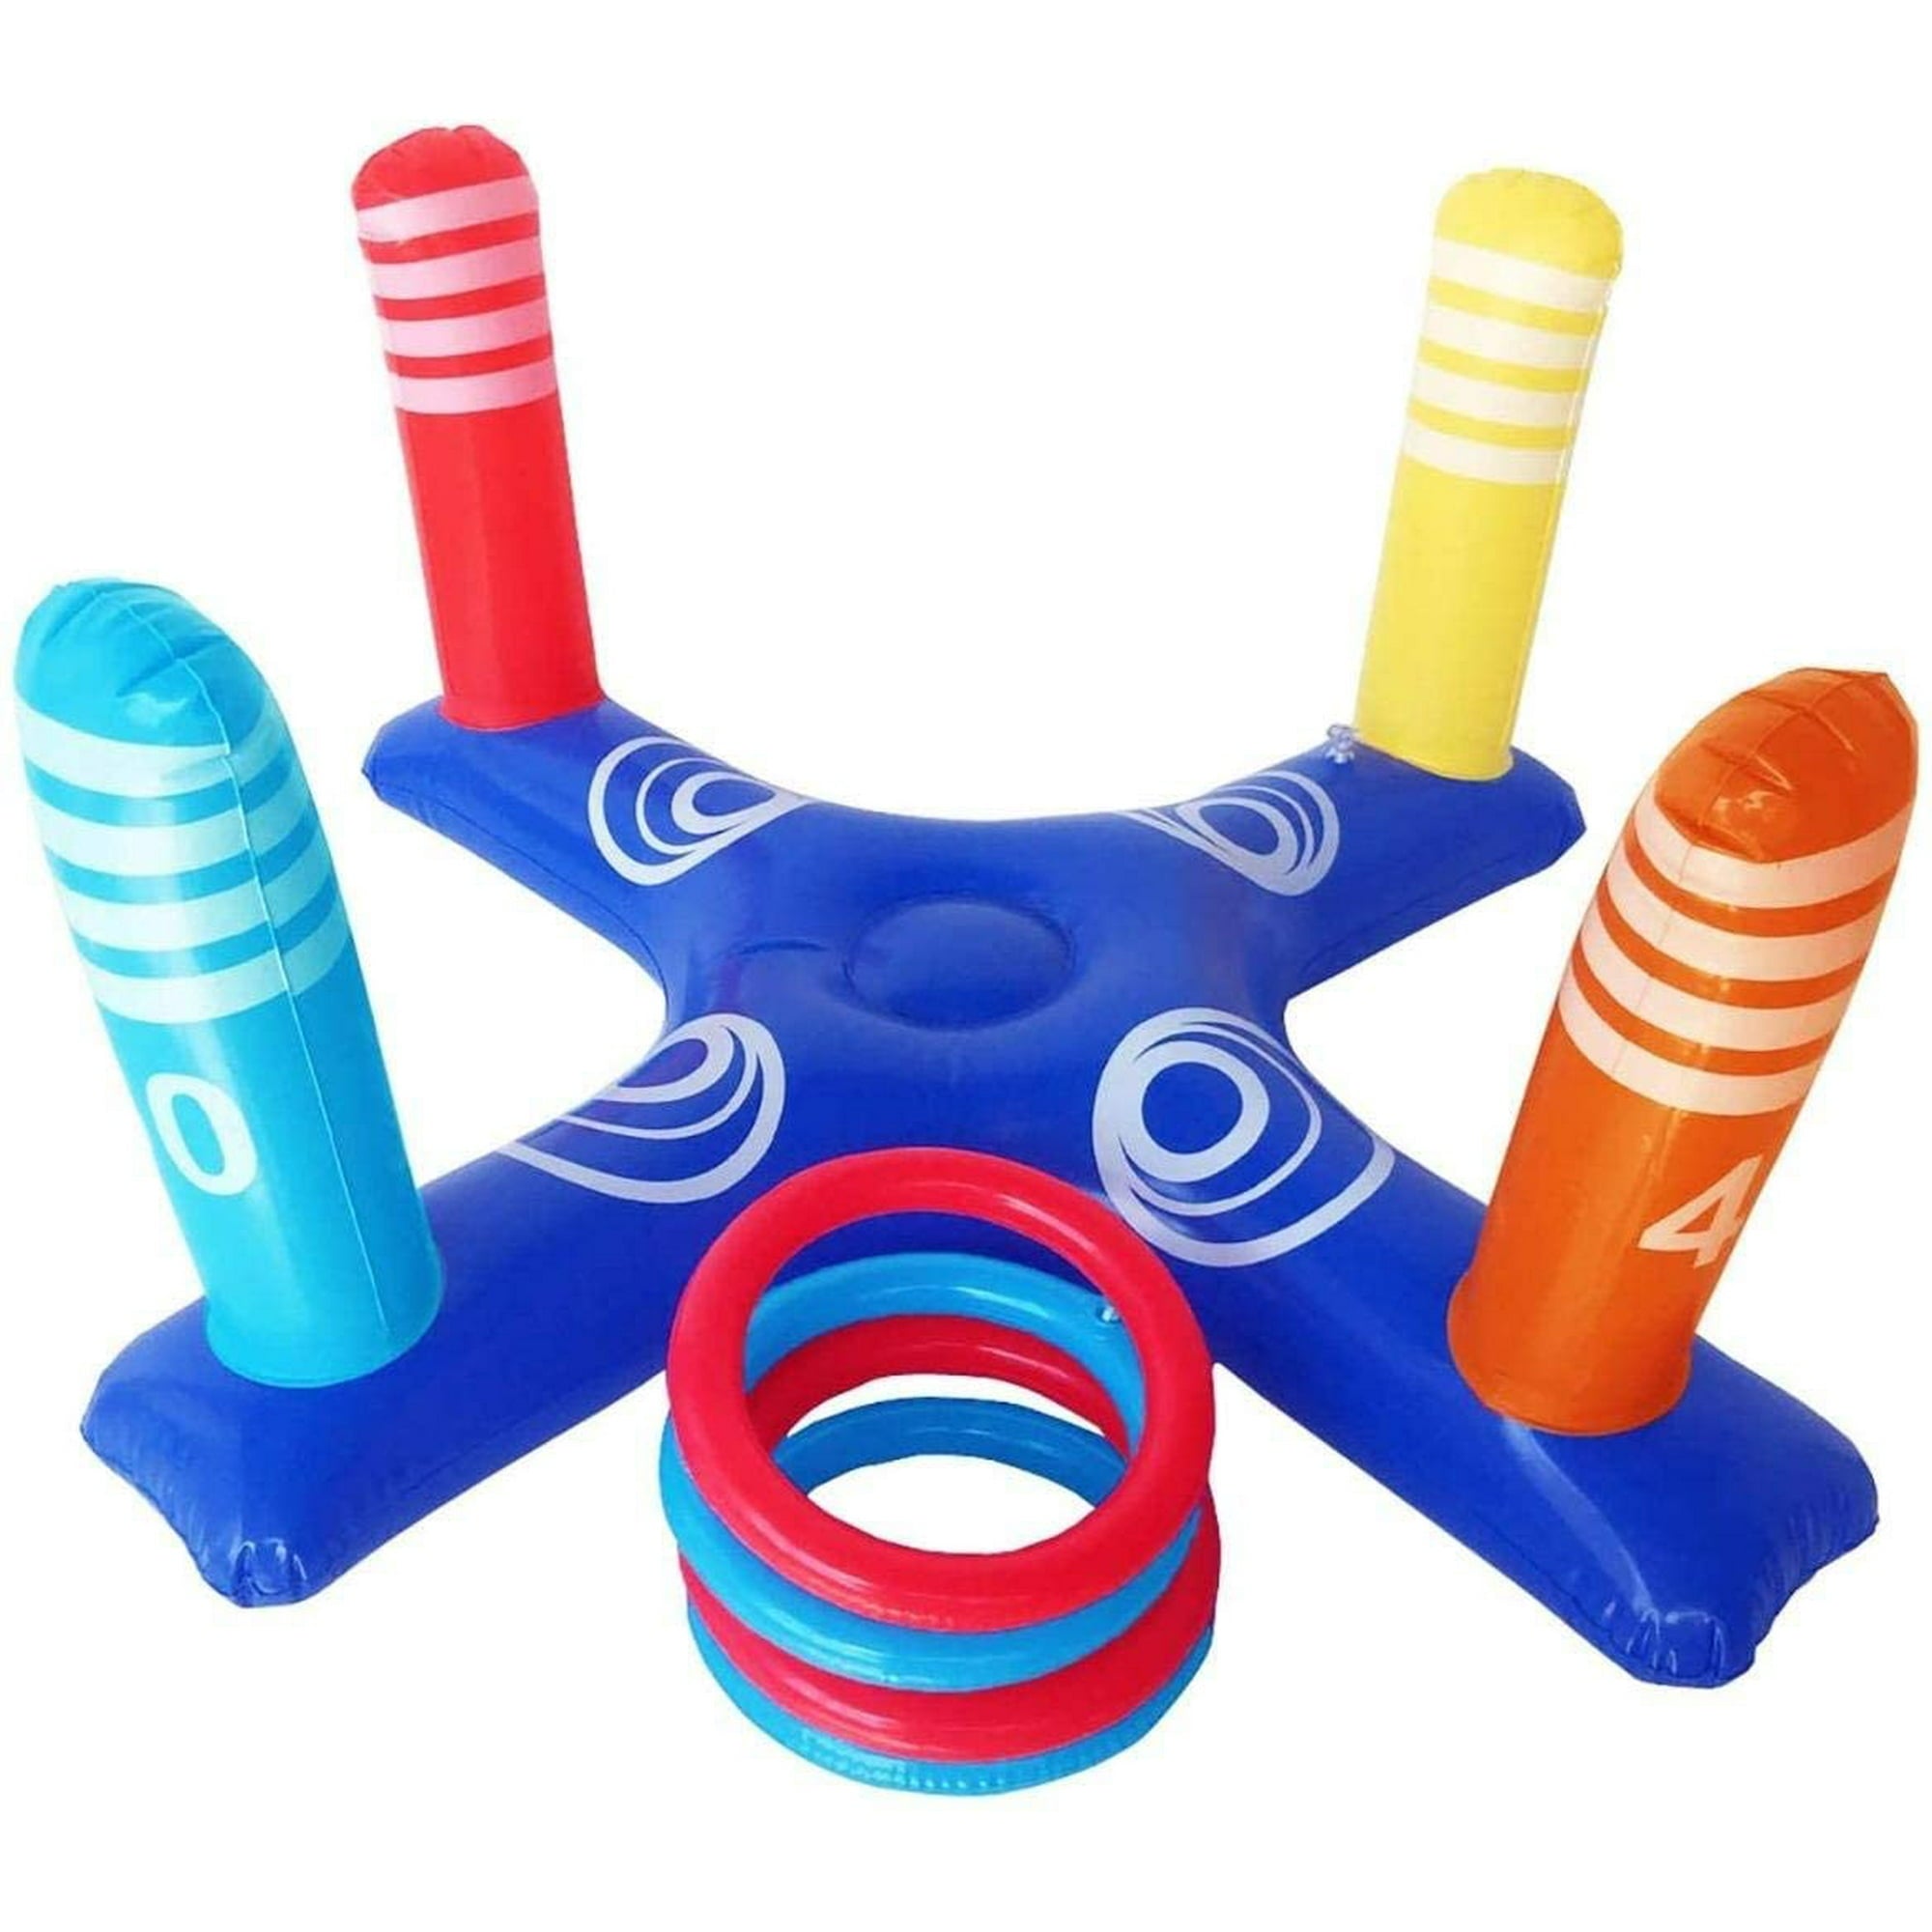 Victoria Inflatable Ring Toss Pool Game, Floating Pool Toy with 4 Pcs Rings for Party Games, Pool Beach Toys